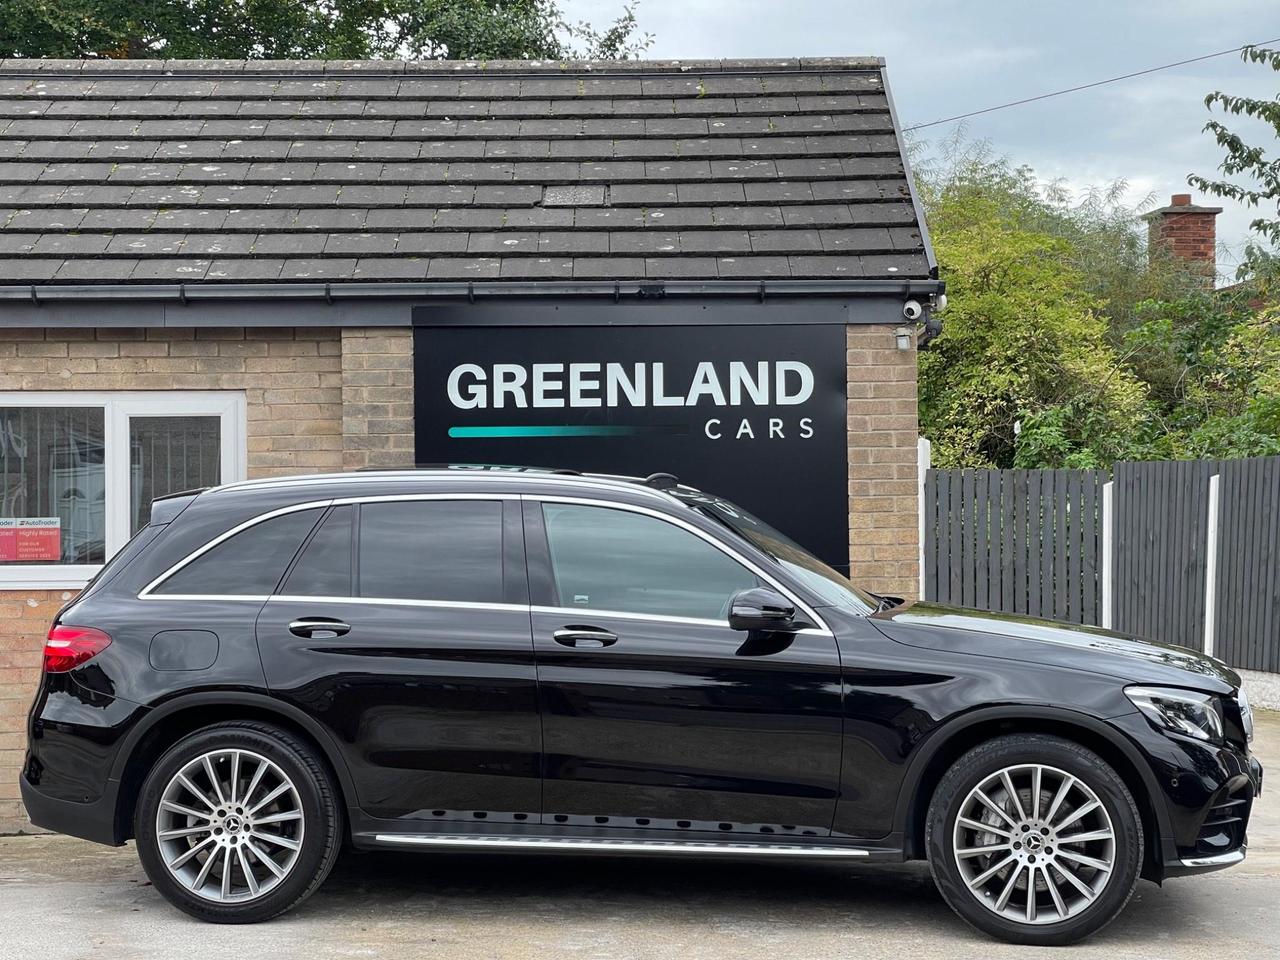 Used 2018 Mercedes-Benz GLC Class for sale in Sheffield